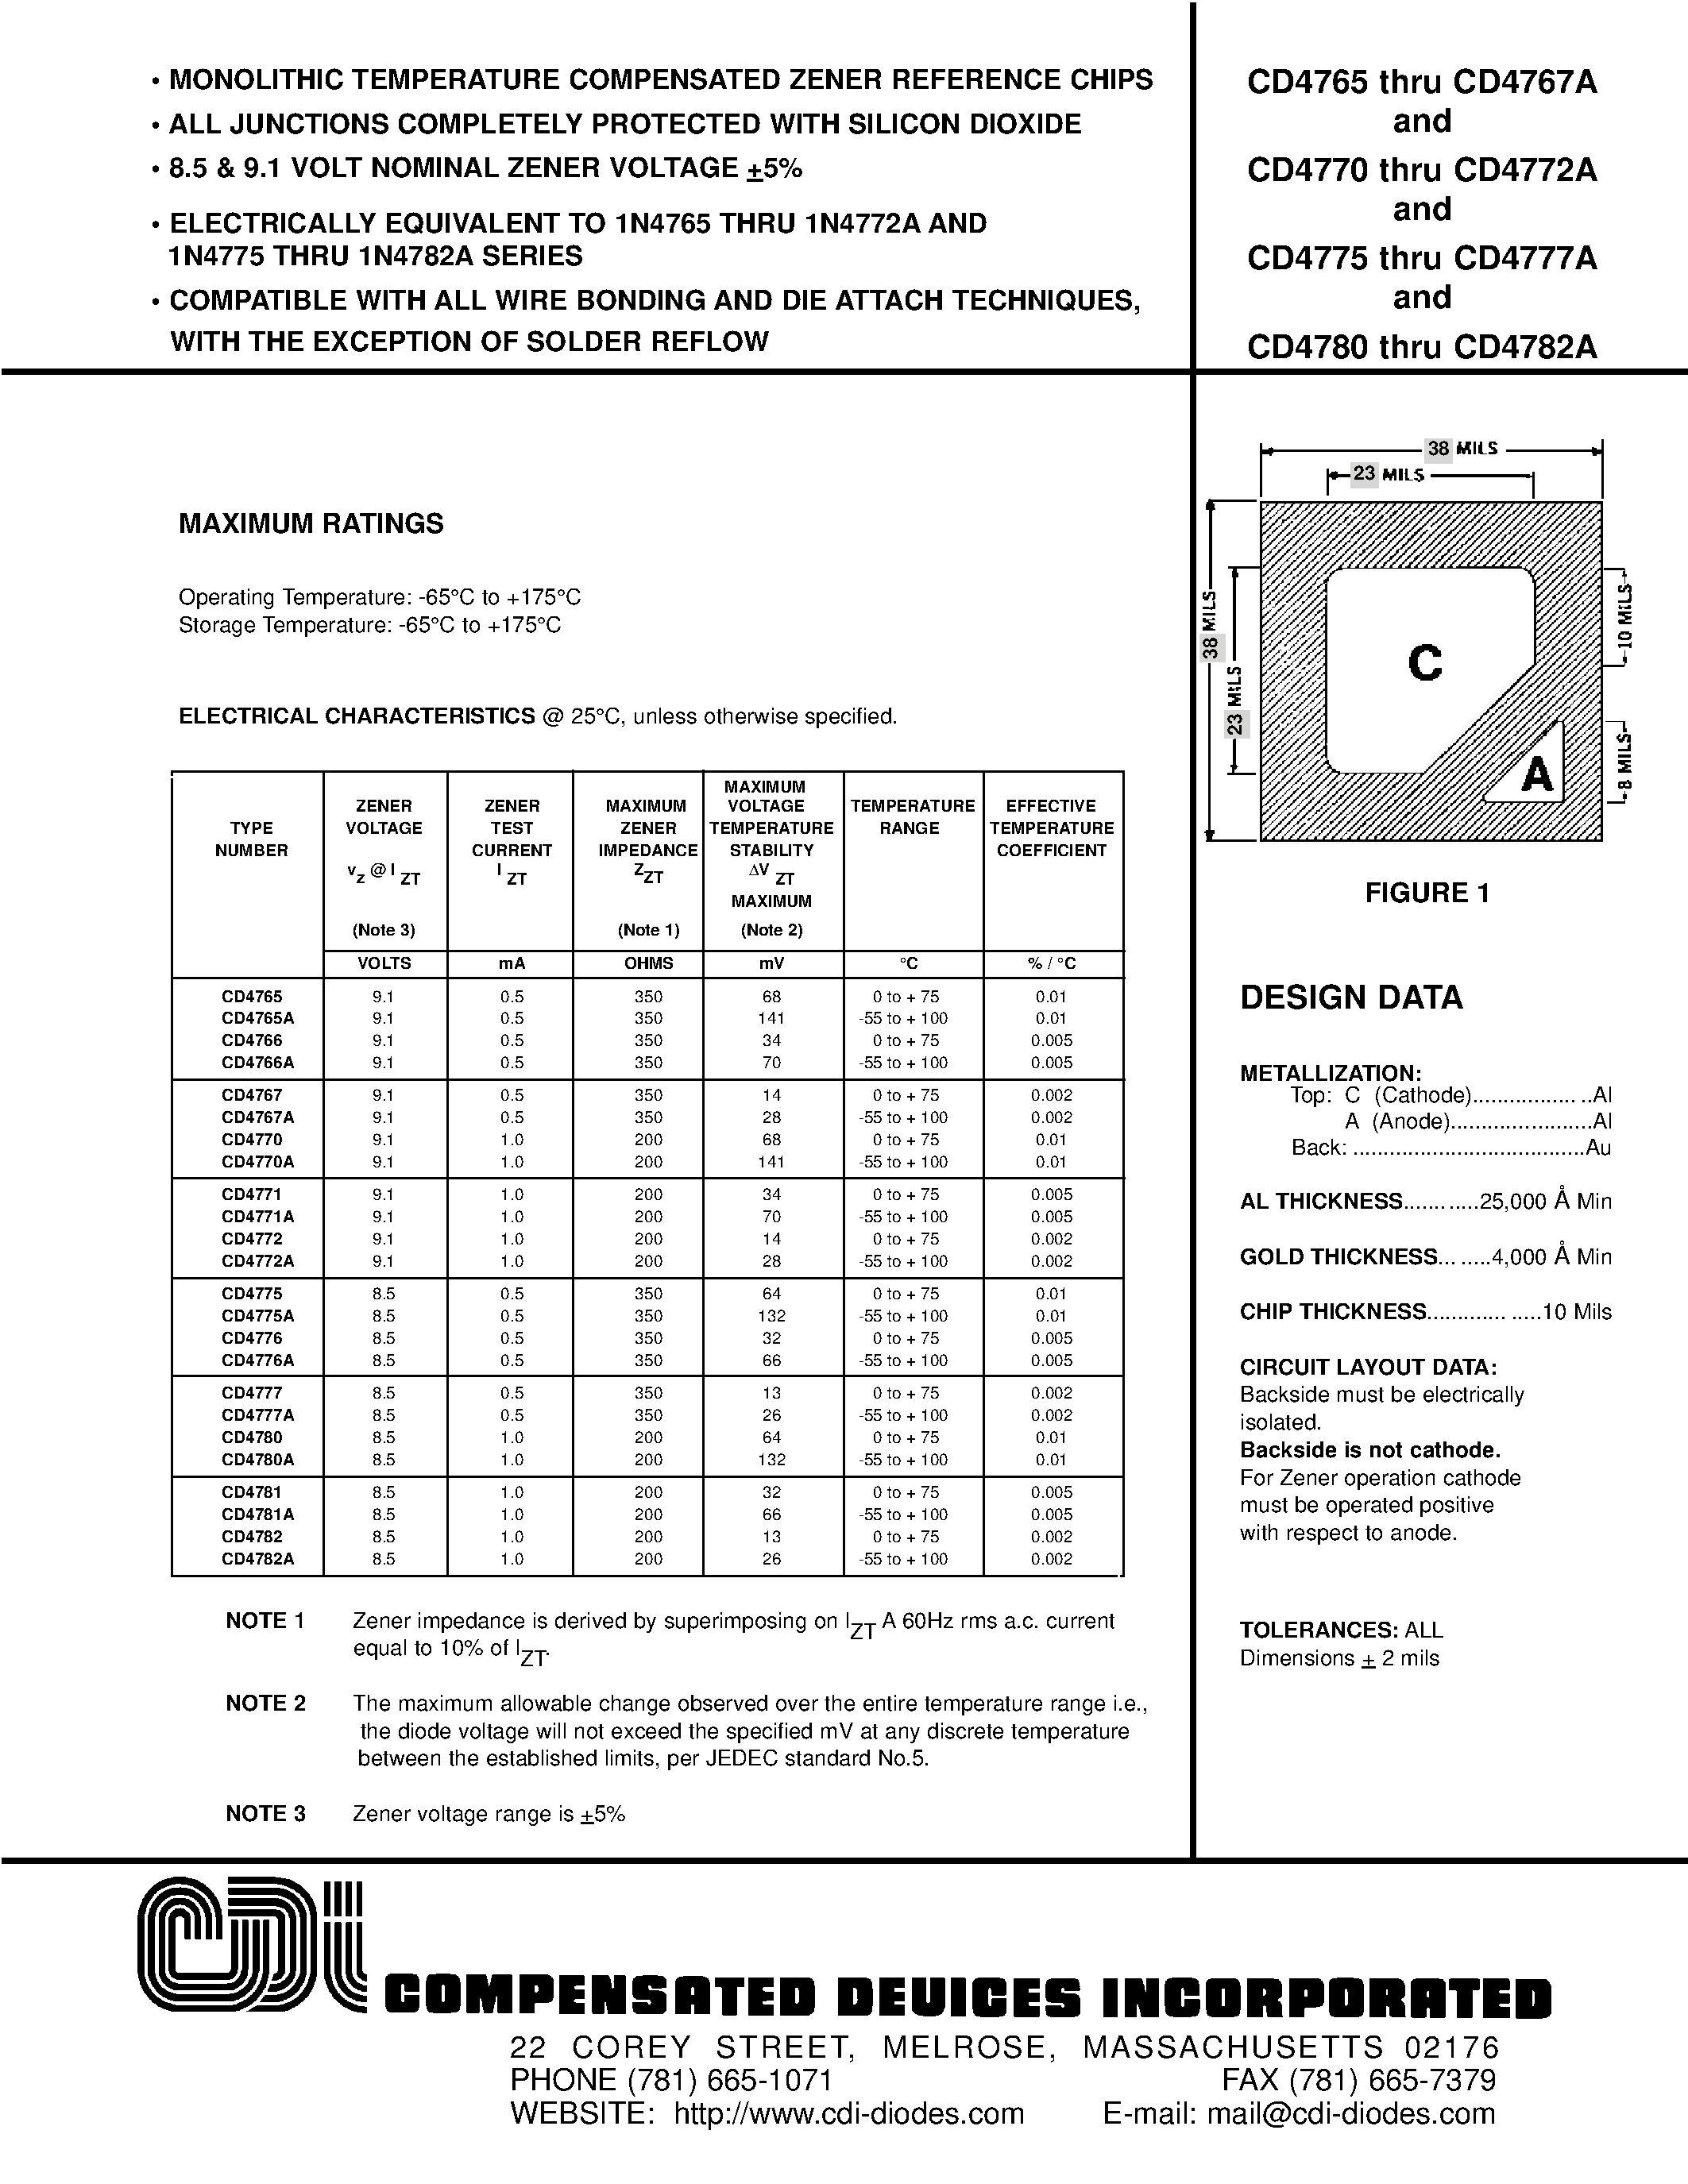 Datasheet CD4775A - MONOLITHIC TEMPERATURE COMPENSATED ZENER REFERENCE CHIPS page 1